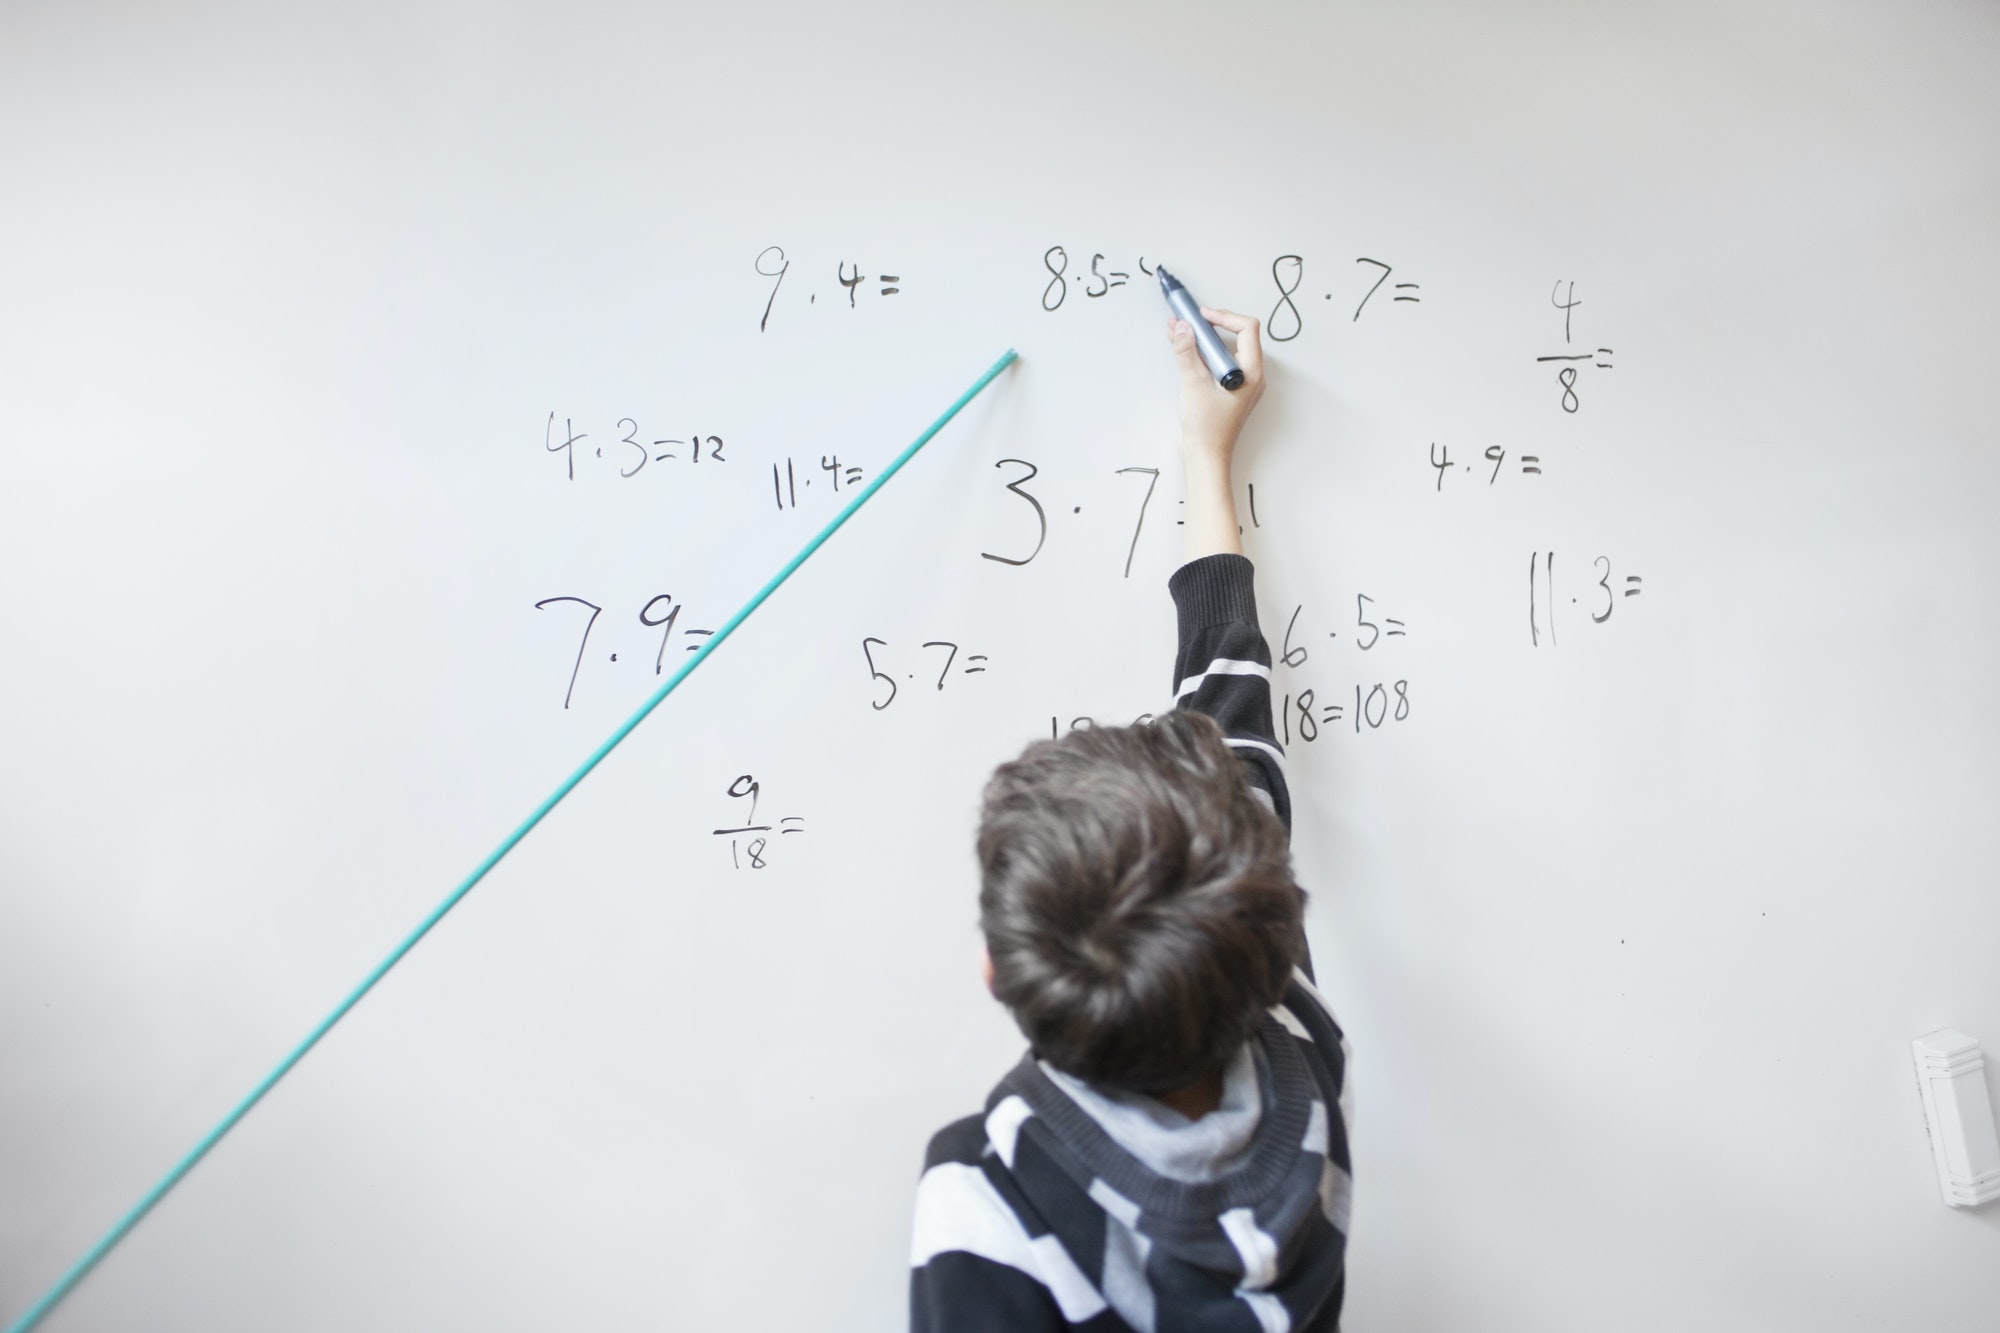 Rear view of boy writing on whiteboard in classroom